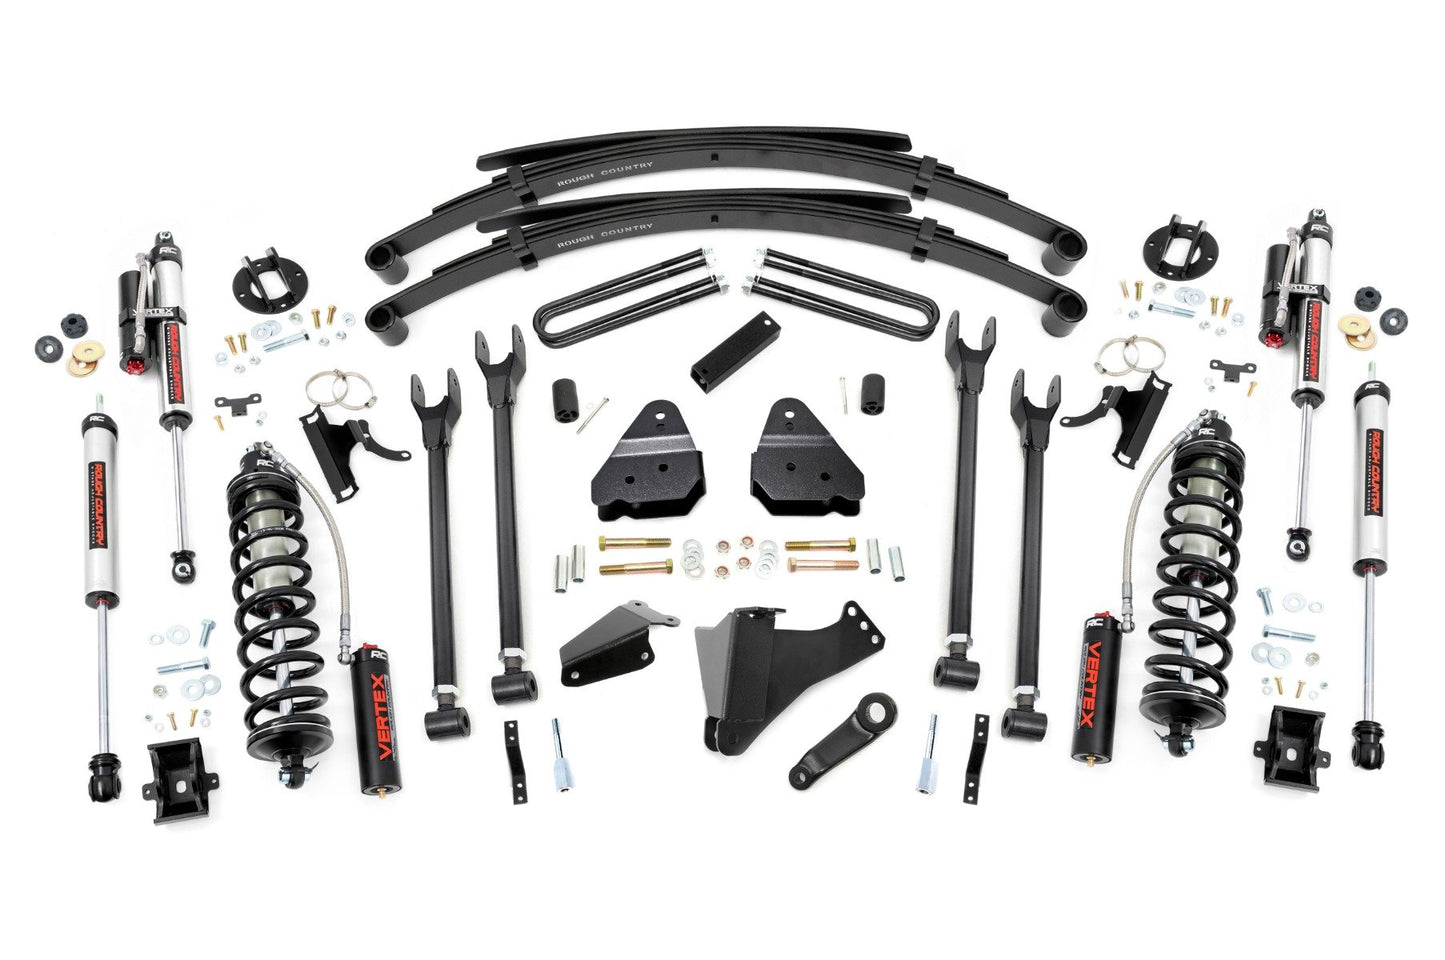 Rough Country (58259) 6 Inch Lift Kit | Diesel | 4 Link | RR Spring | C/O Vertex | Ford F-250/F-350 Super Duty (05-07)